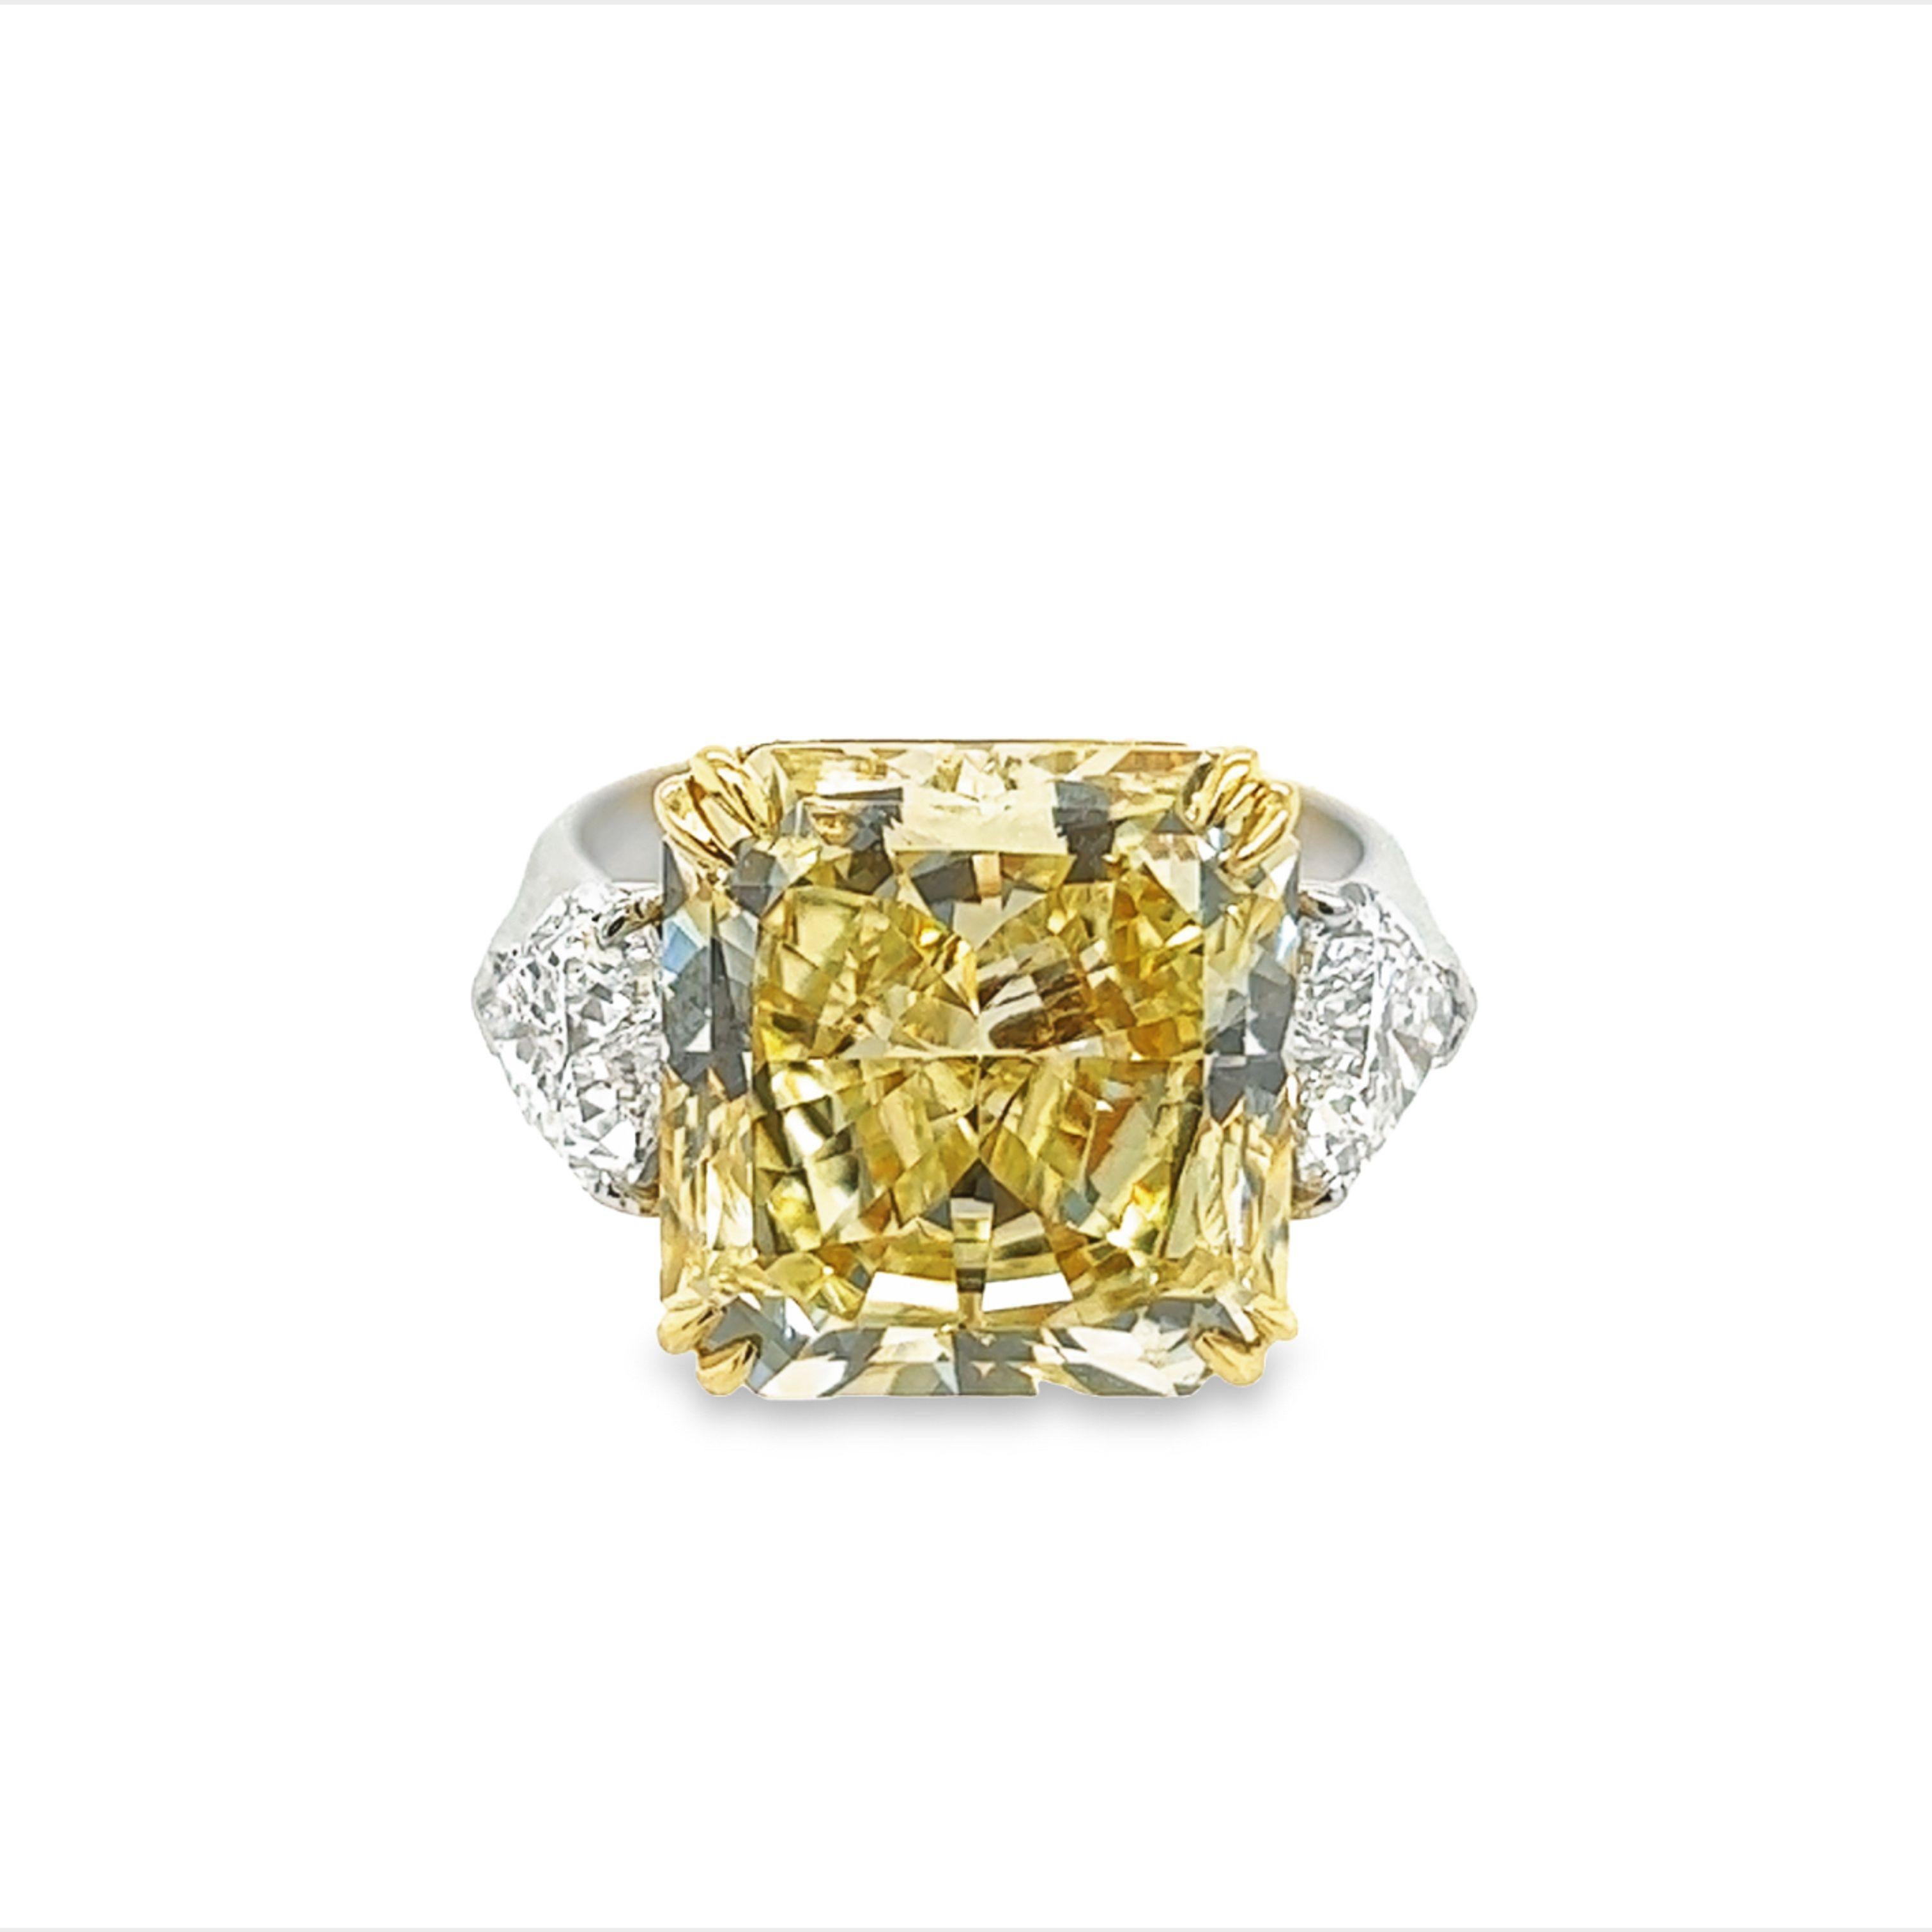 Rosenberg Diamonds & Co. 10.23 carat Radiant Cut Fancy Yellow VVS1 clarity is accompanied by a GIA certificate. This extraordinary radiant cut is set in a handmade platinum & 18k yellow gold setting with perfectly matched pair of heart shaped side